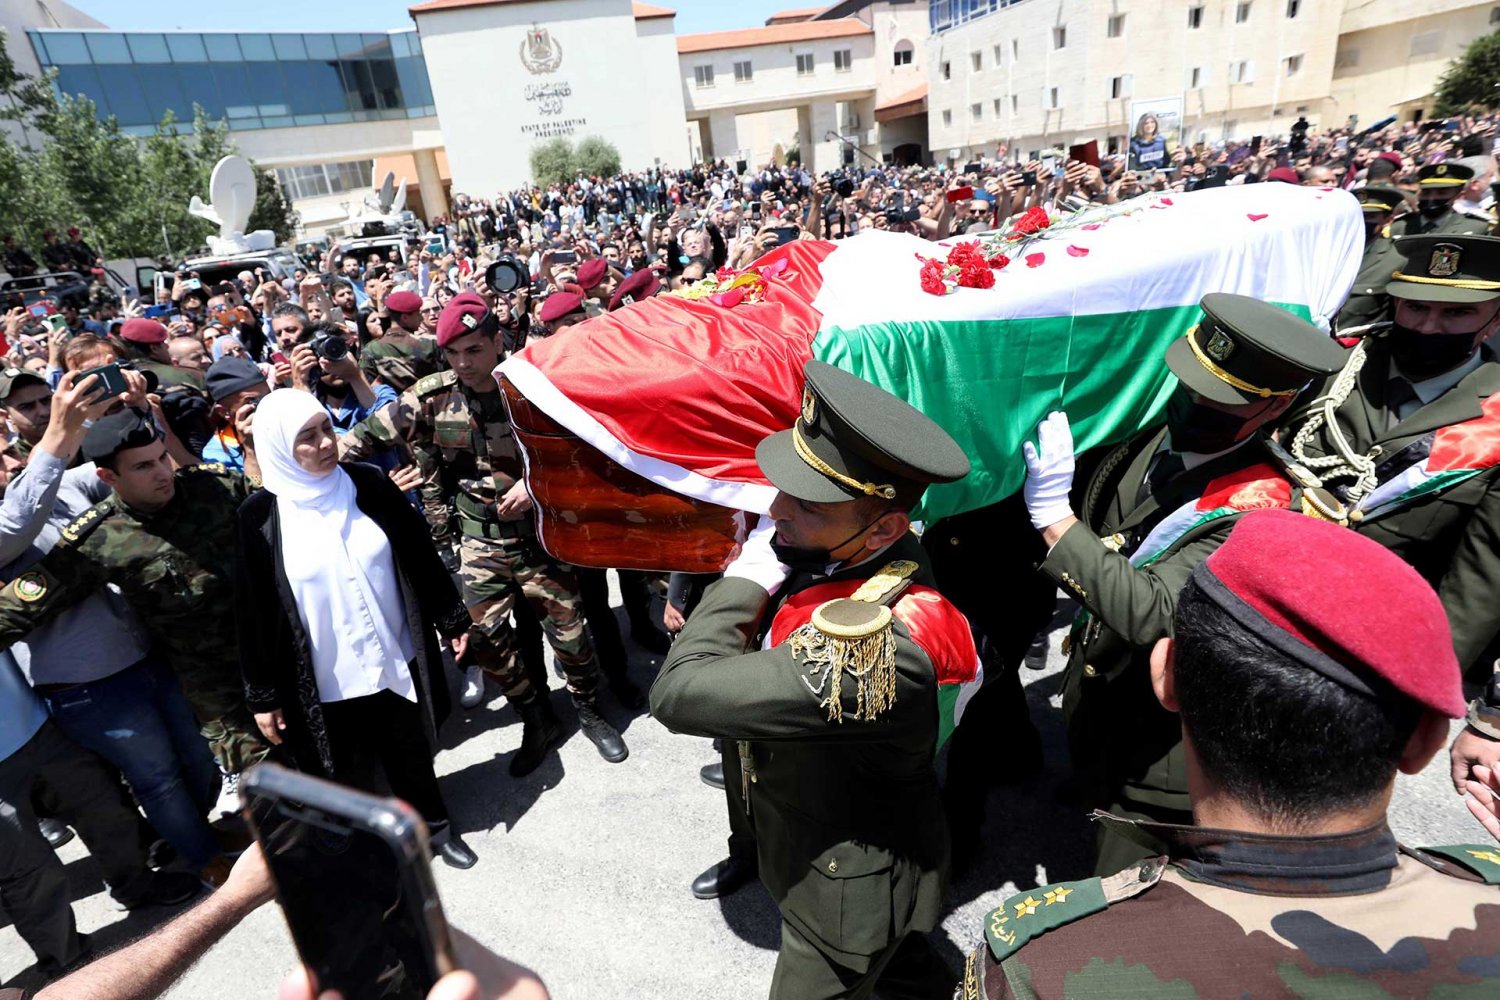 A Palestinian honor guard carries the coffin of Shireen Abu Akleh at the Palestinian Authority headquarters in Ramallah